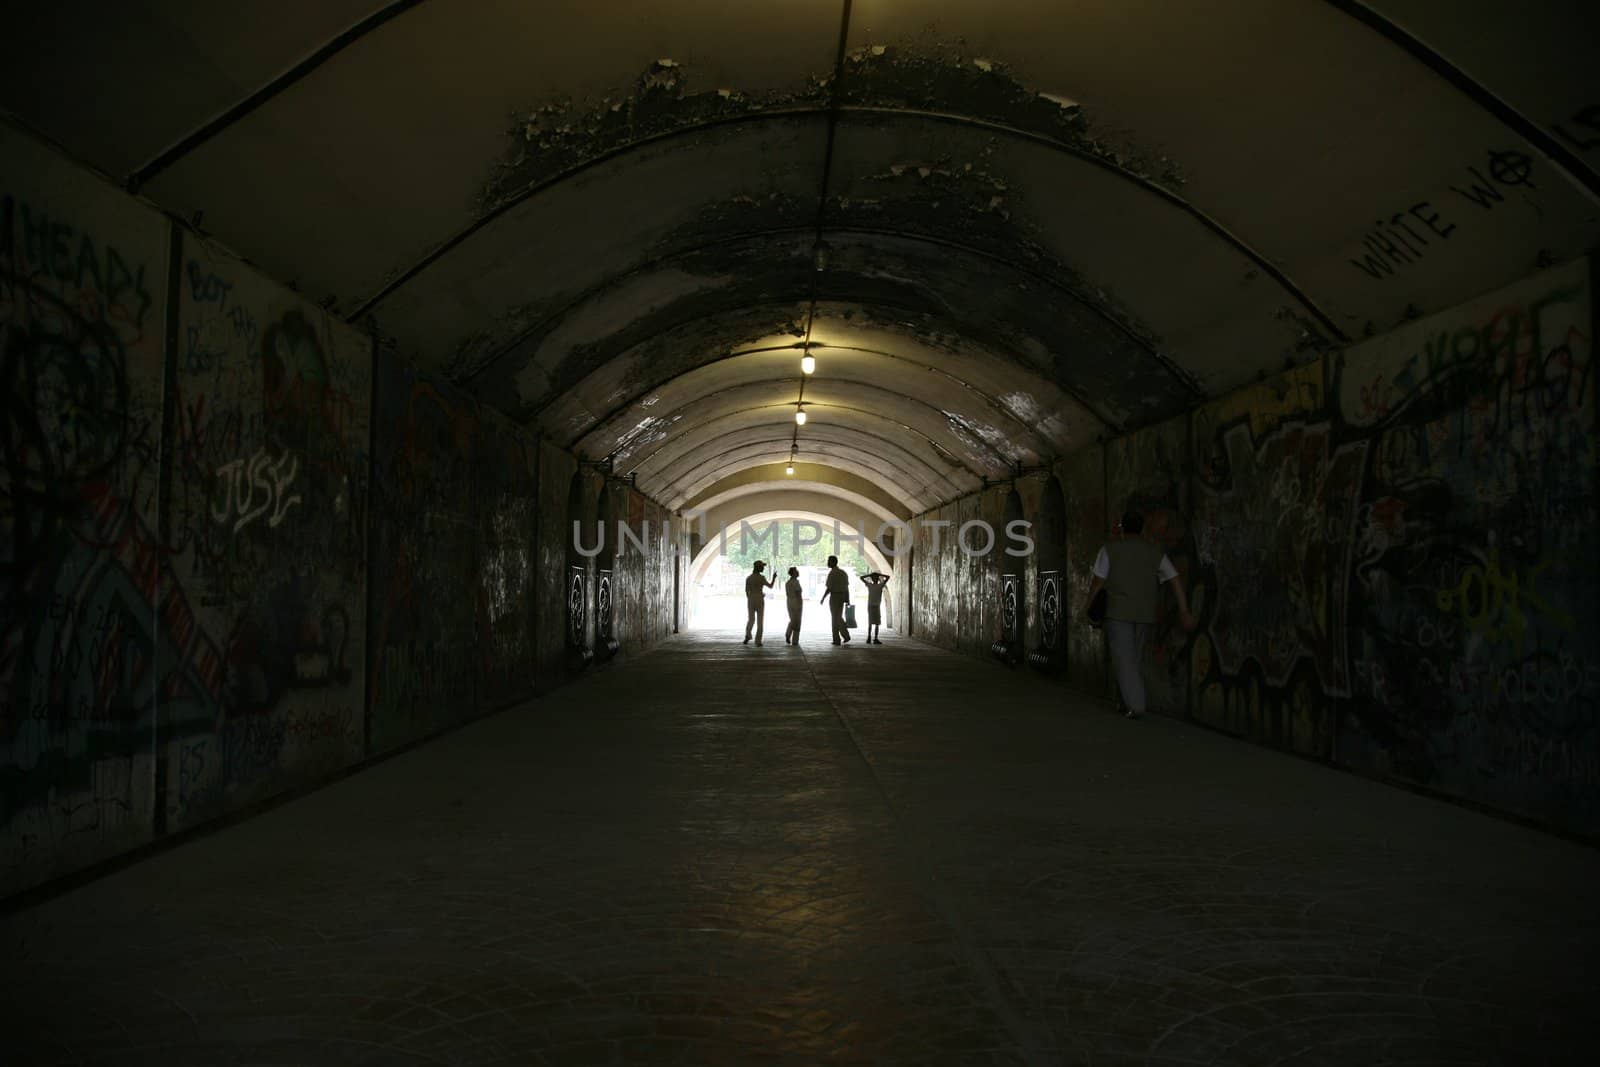 Several people are walking in the underpass